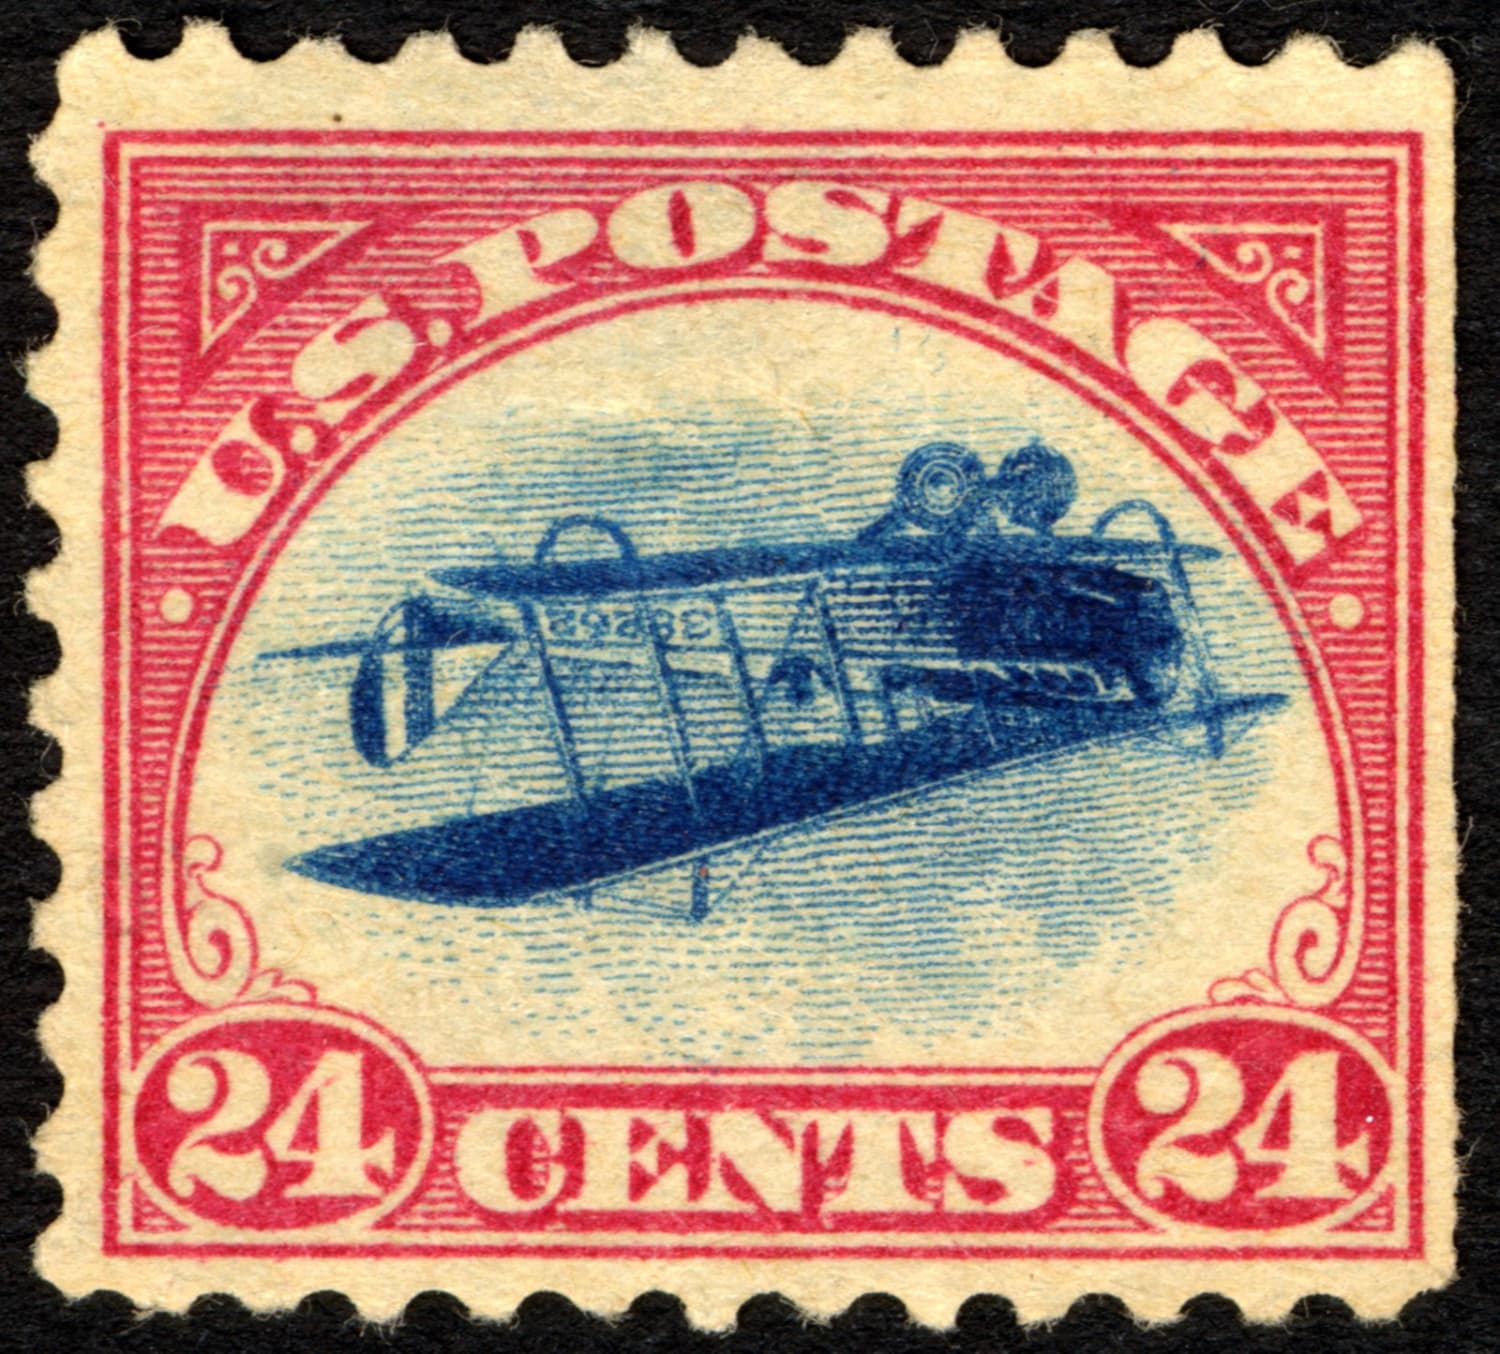 How the Inverted Jenny, a 24-Cent Stamp, Came to Be Worth a Fortune